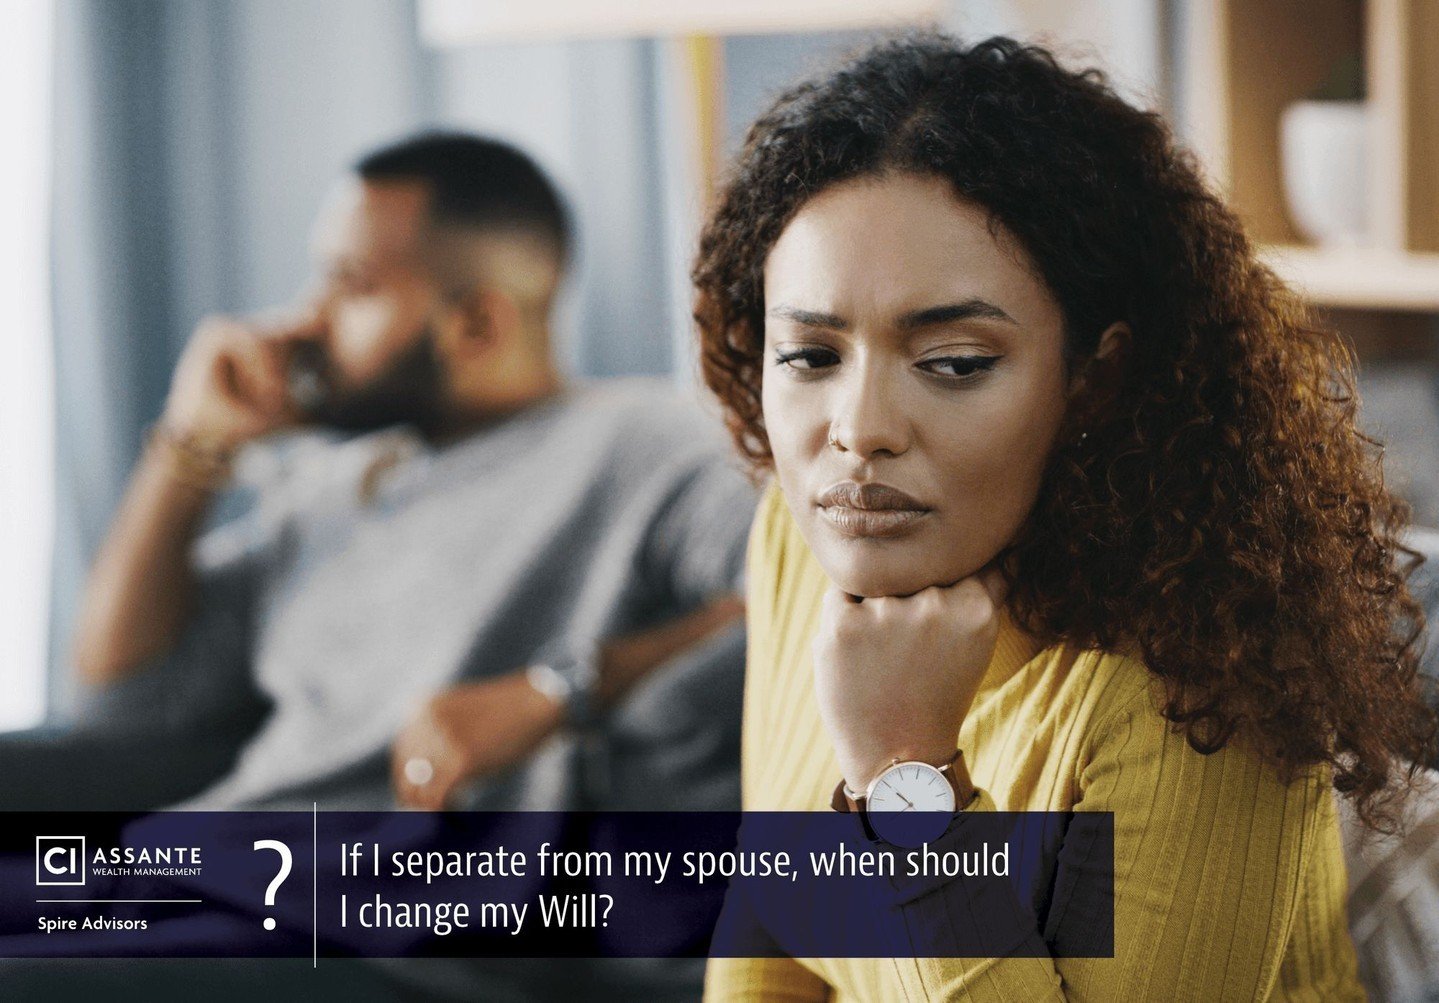 If you separate from your spouse, it's important for you to change (or establish) your Will as soon as possible. Here is why:

&bull; If you do NOT have a Will: your spouse will be entitled to inherit all (or a large portion of) your estate. This can